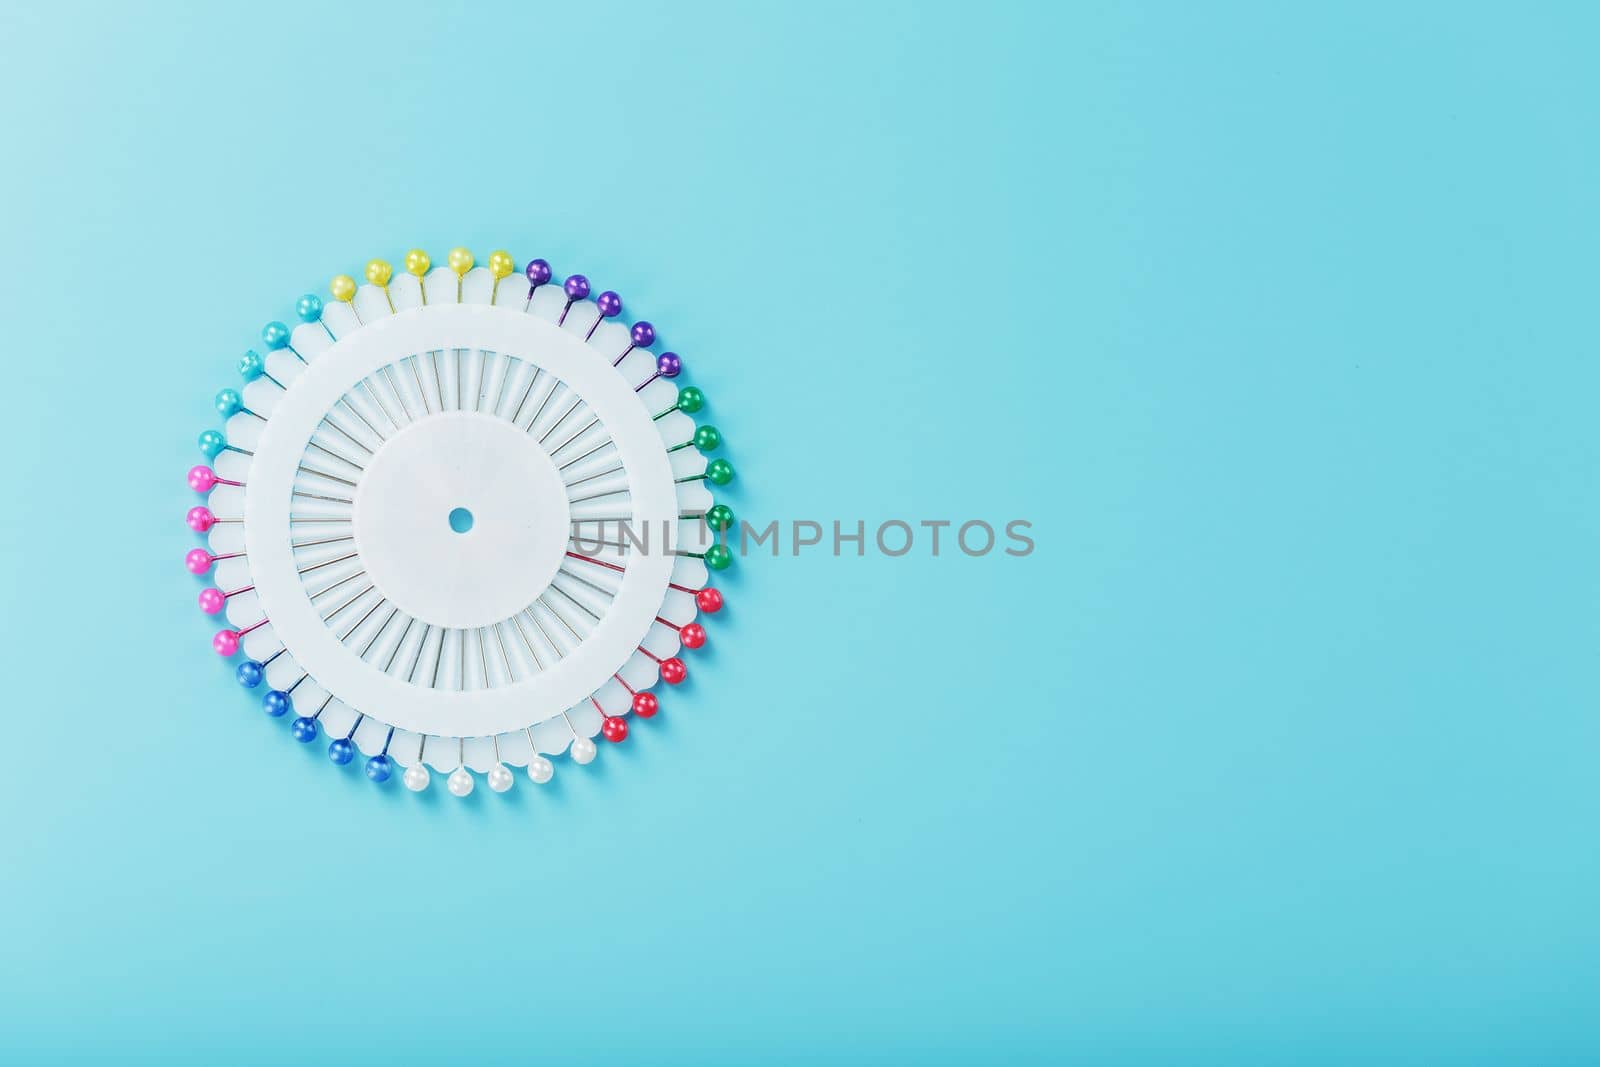 A set of multicolored needles pins in a round platform on a blue background with free space